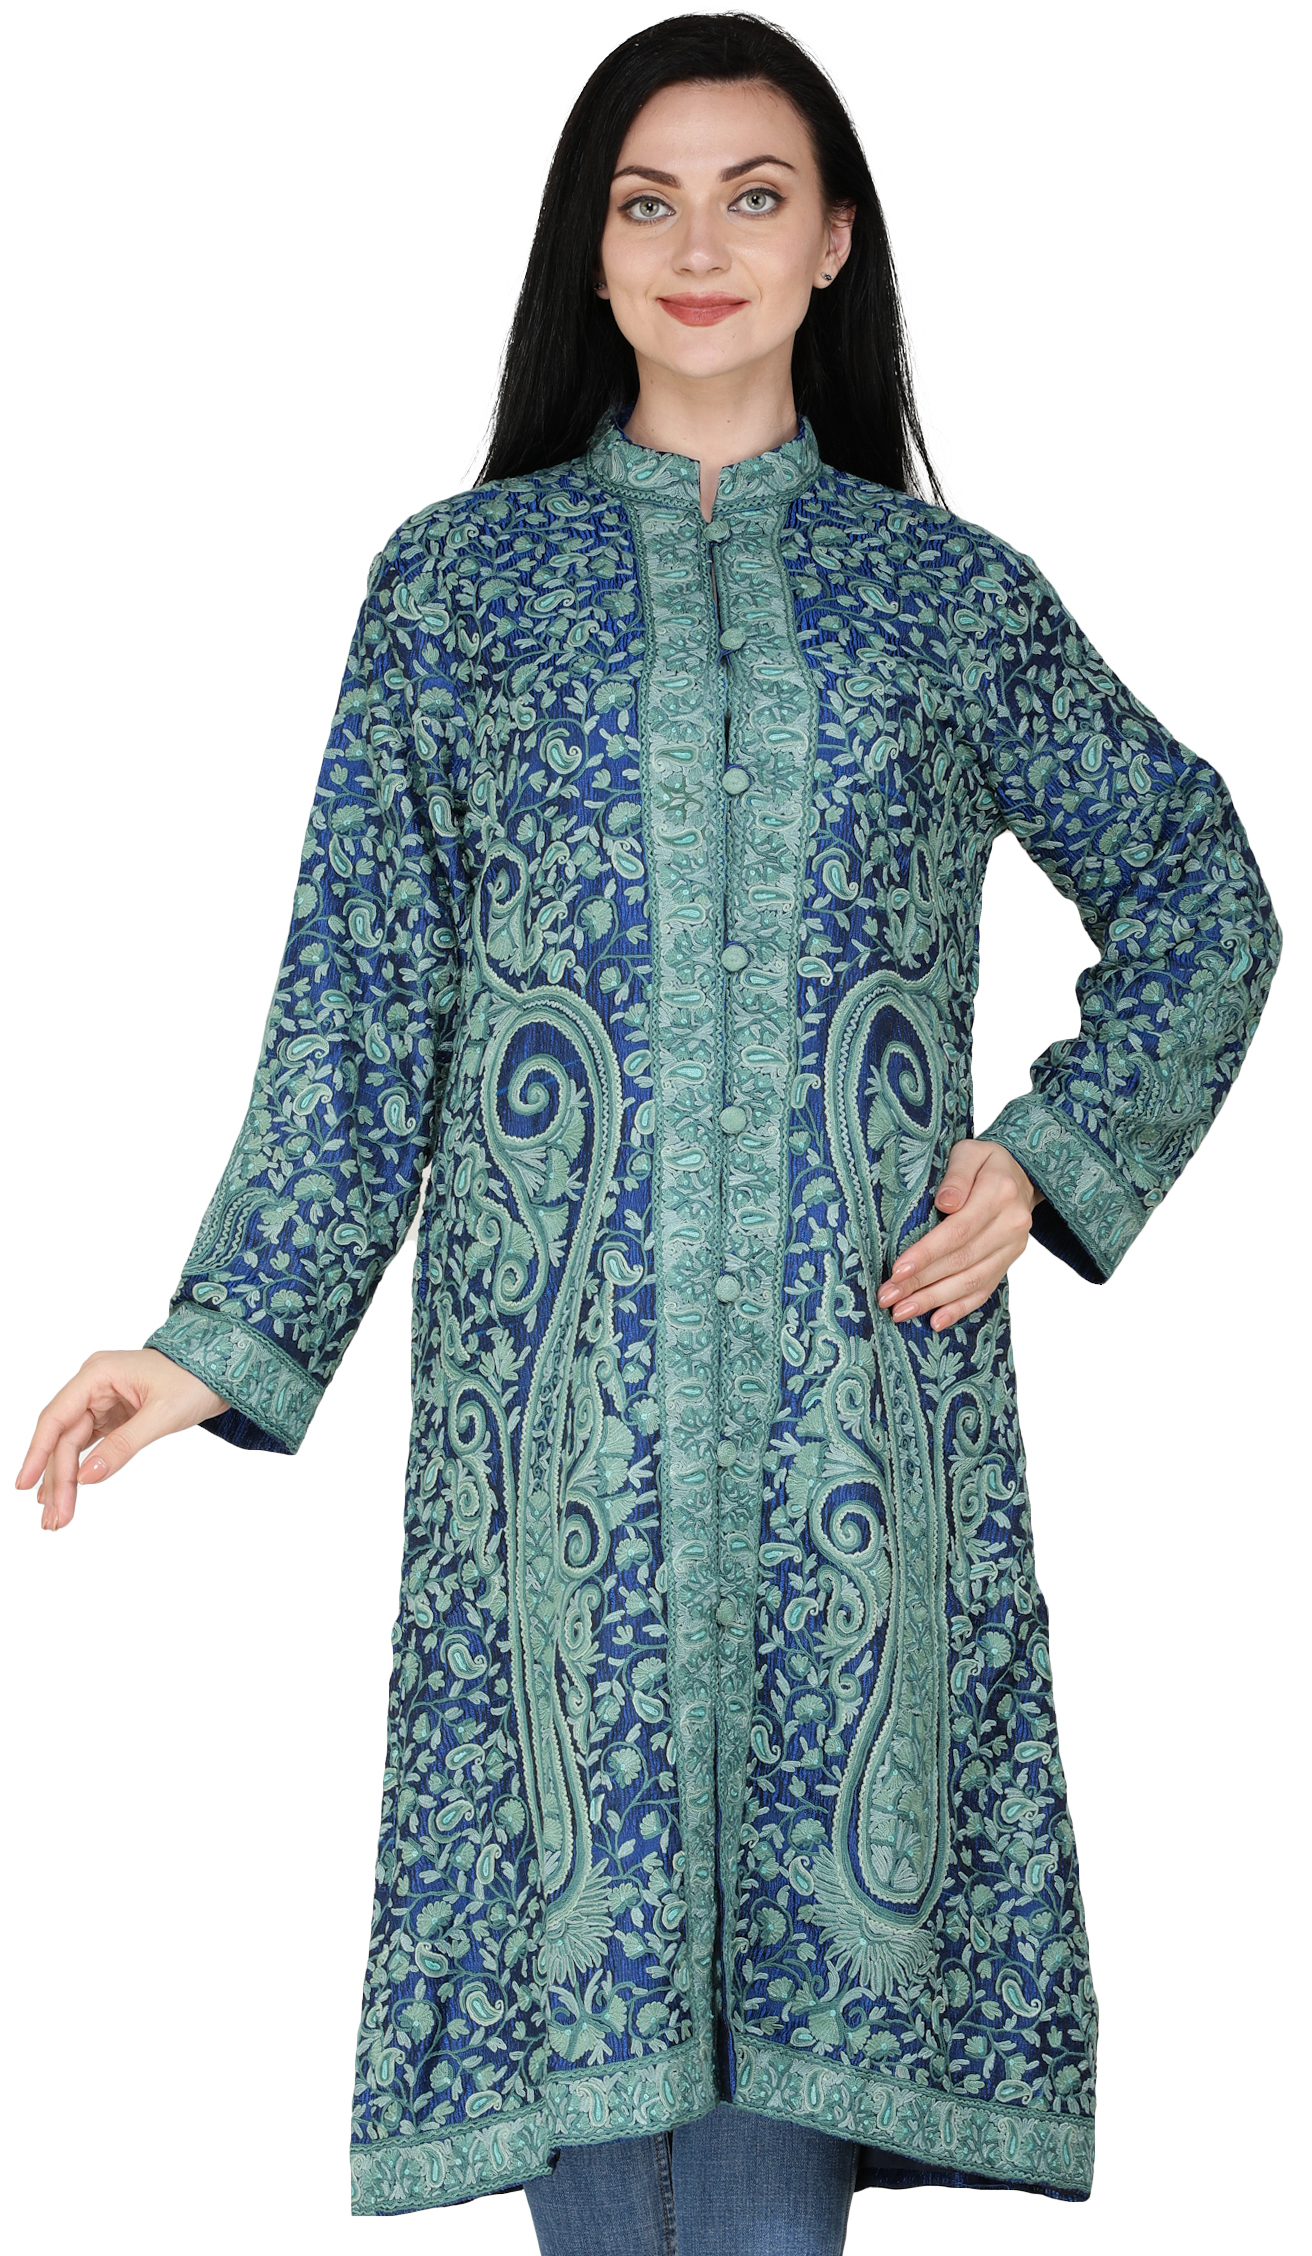 Victoria-Blue-Kashmiri-Long-Jacket-with-All-Over-Hand-Embroidered-Paisleys